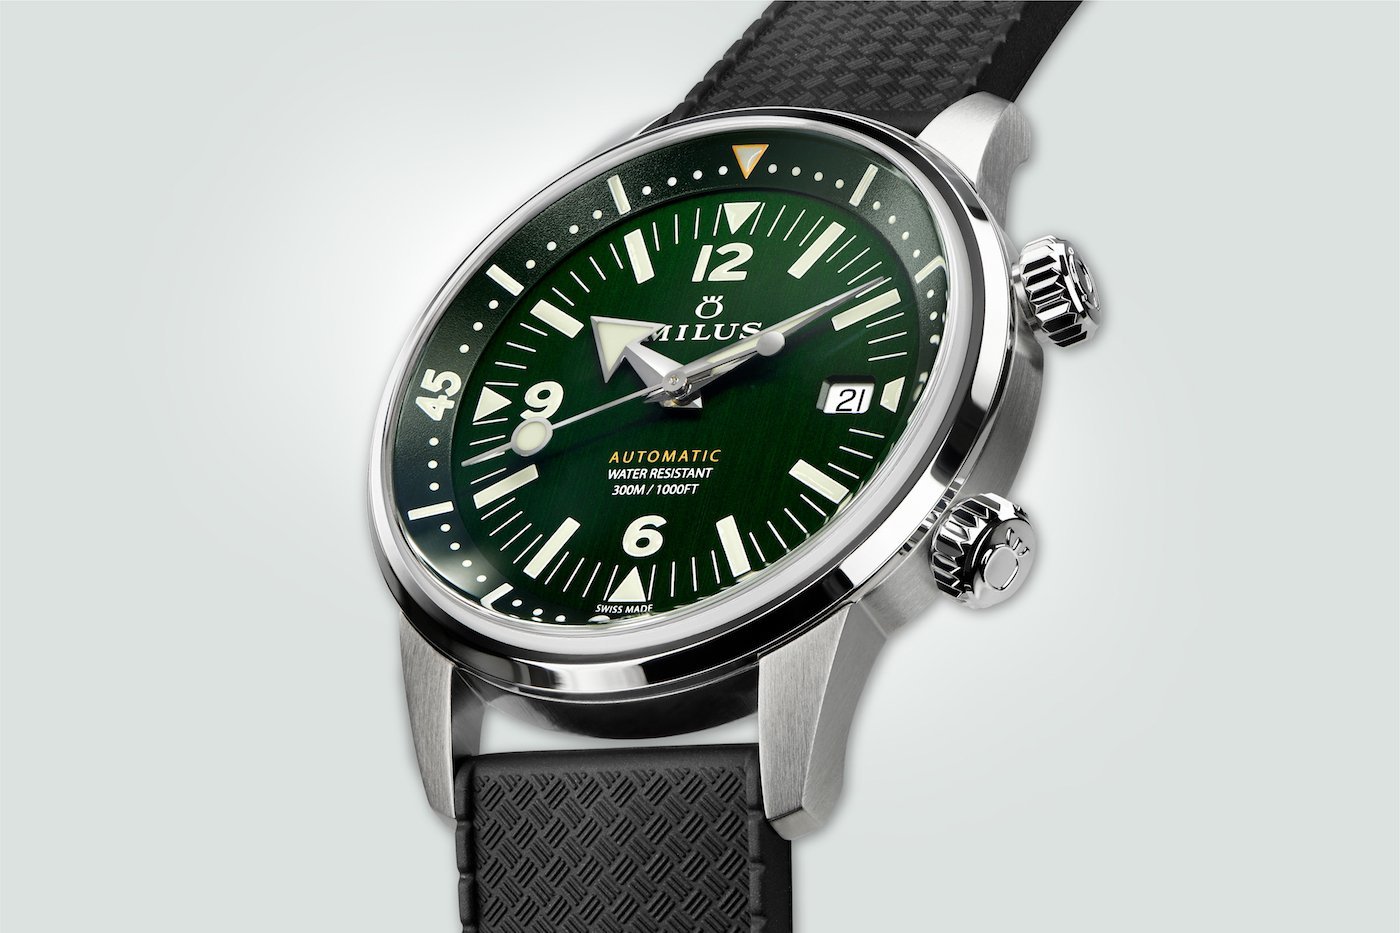 ARCHIMÈDES by Milus - Wild Green, MIH 01-001-180/230, CHF 1919.00